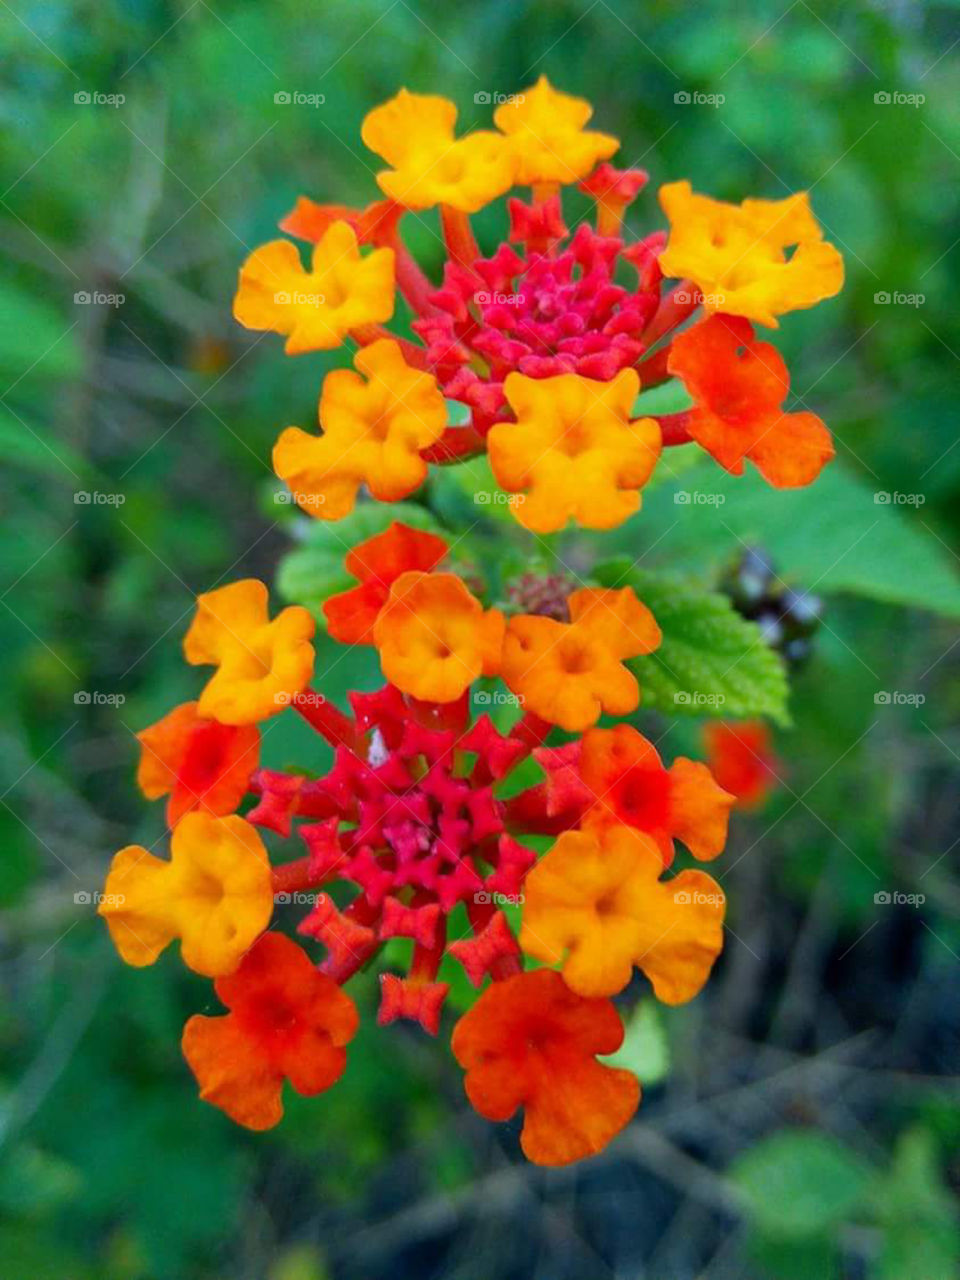 A life and love as colorful like this Bahobaho flower. Commonly  grow in grasslands, so colorful and  smells strong. Like our love, deep bright in color so strong with the test of life.